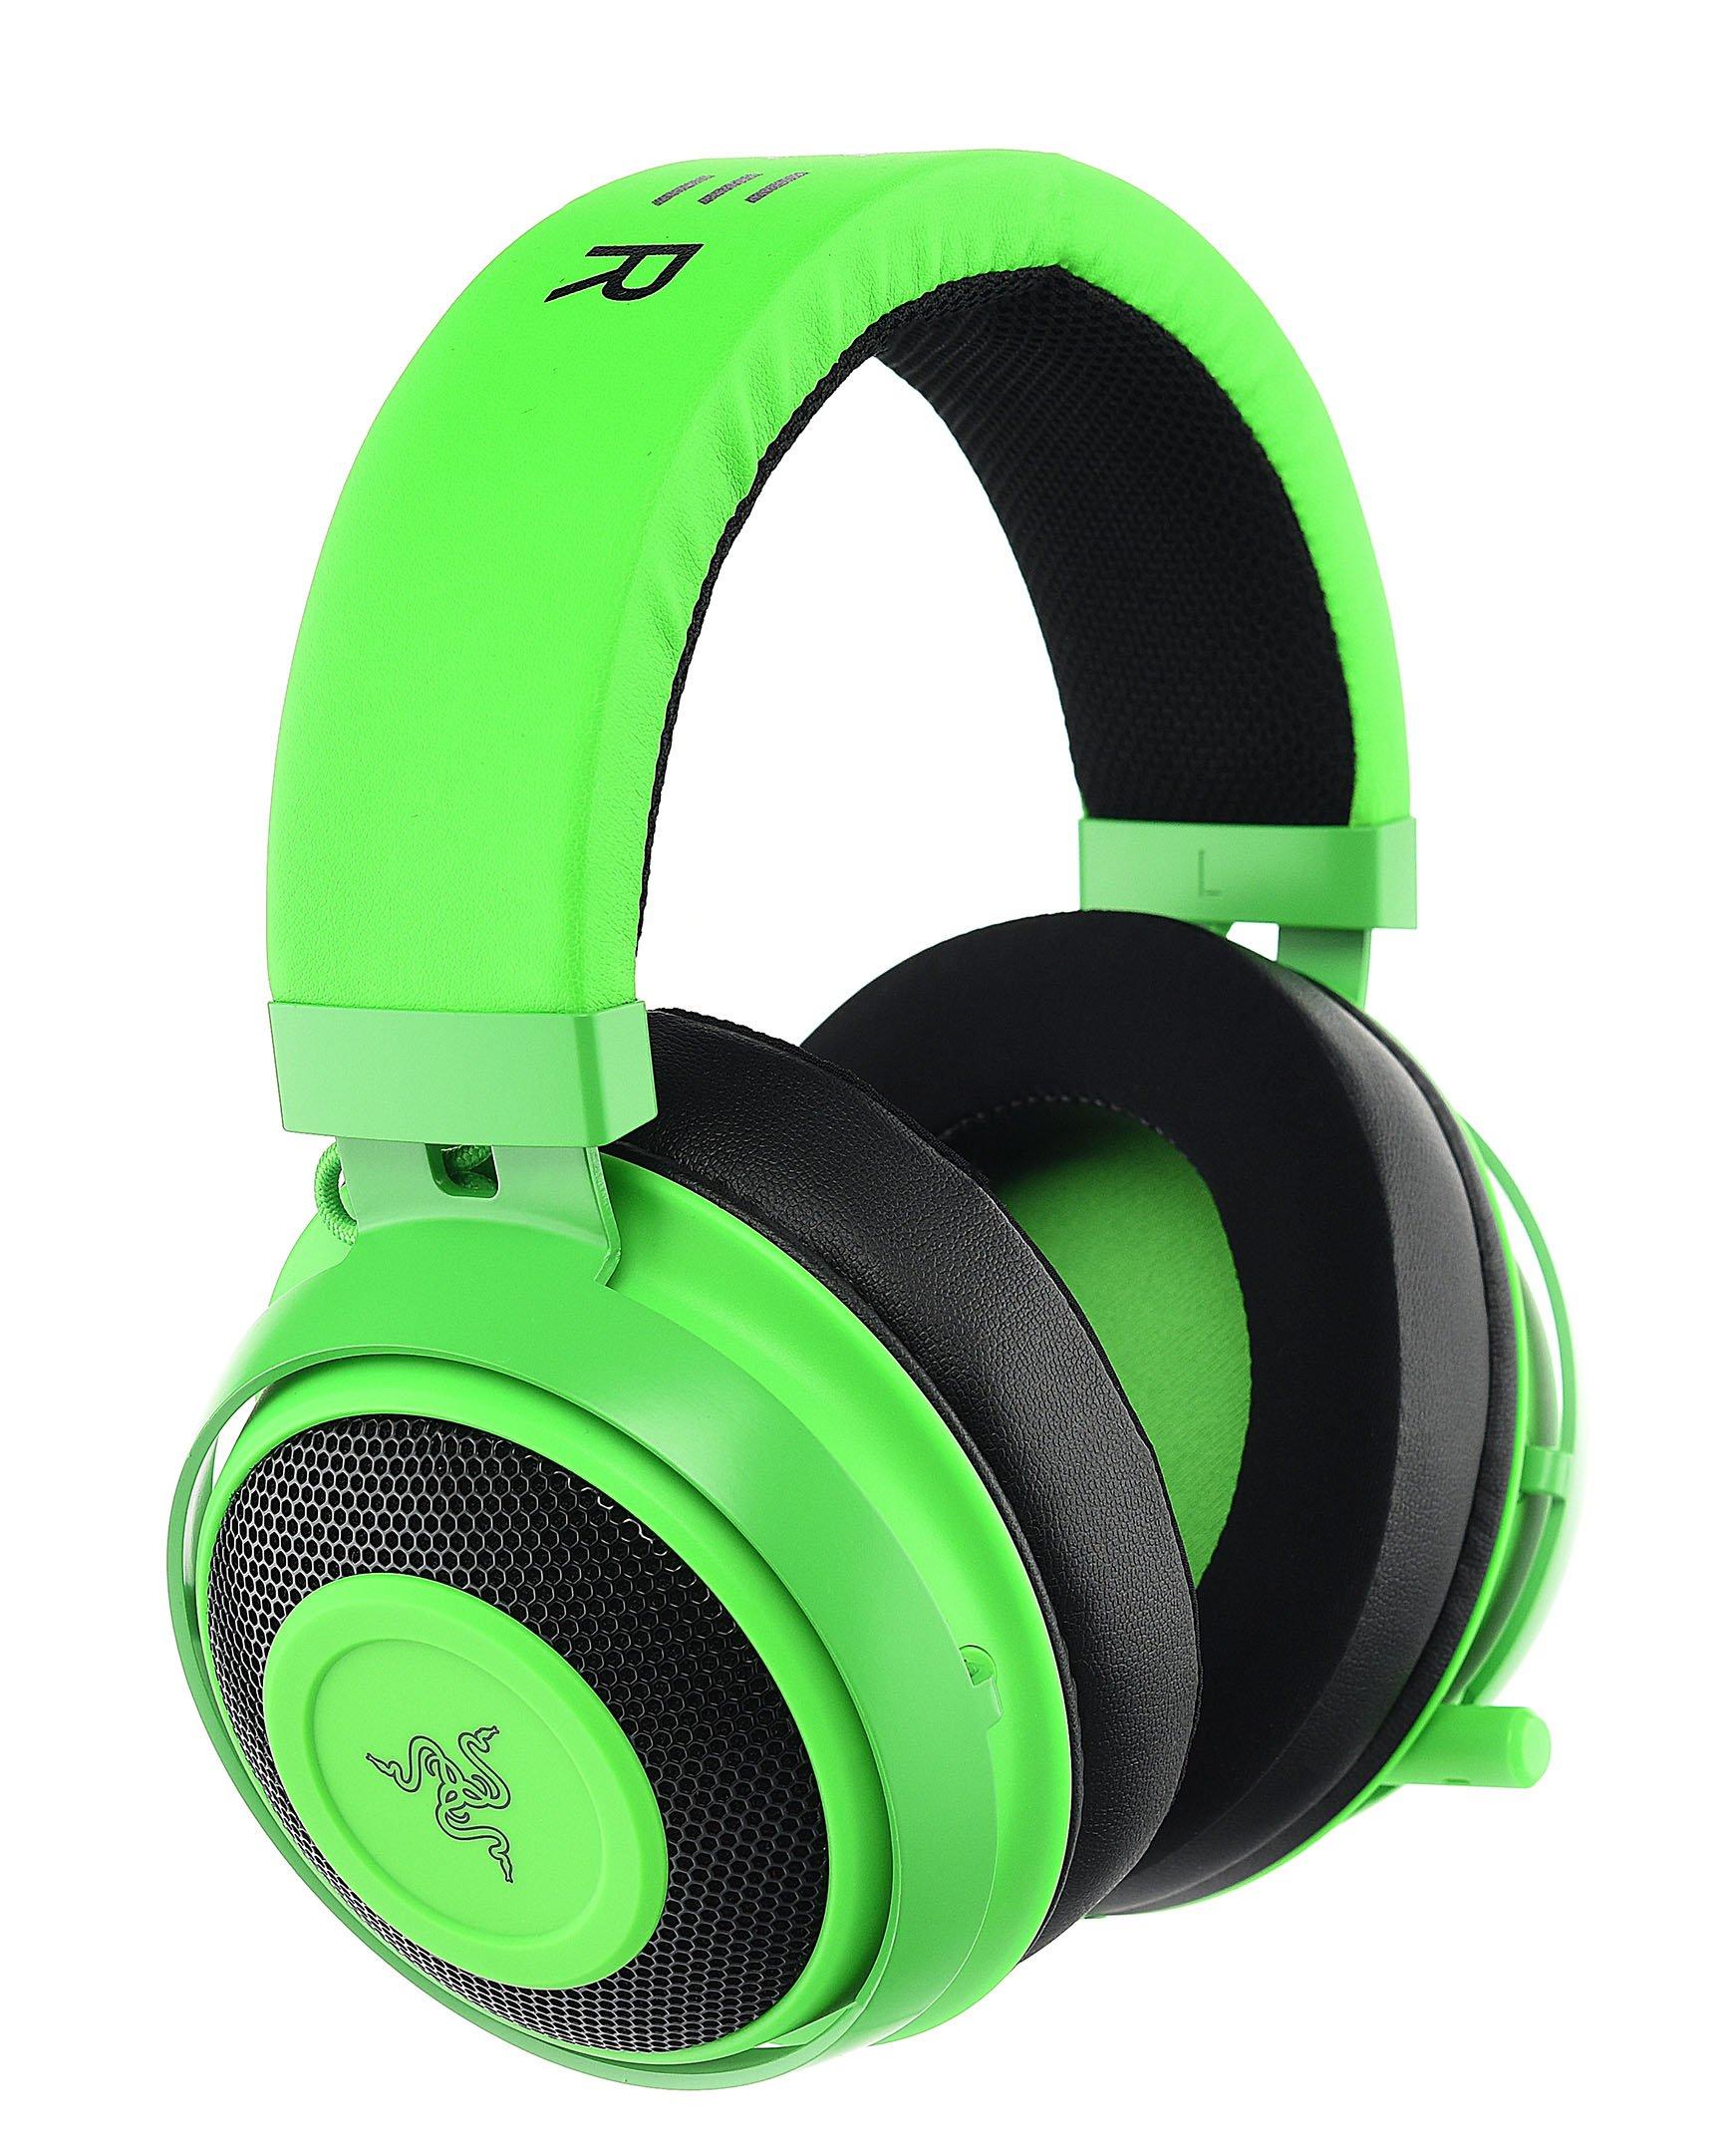 Buy -Razer Kraken Green, Equipped with 7.1 surround sound software, Clear & Accurate Positional Audio in Saudi Arabia